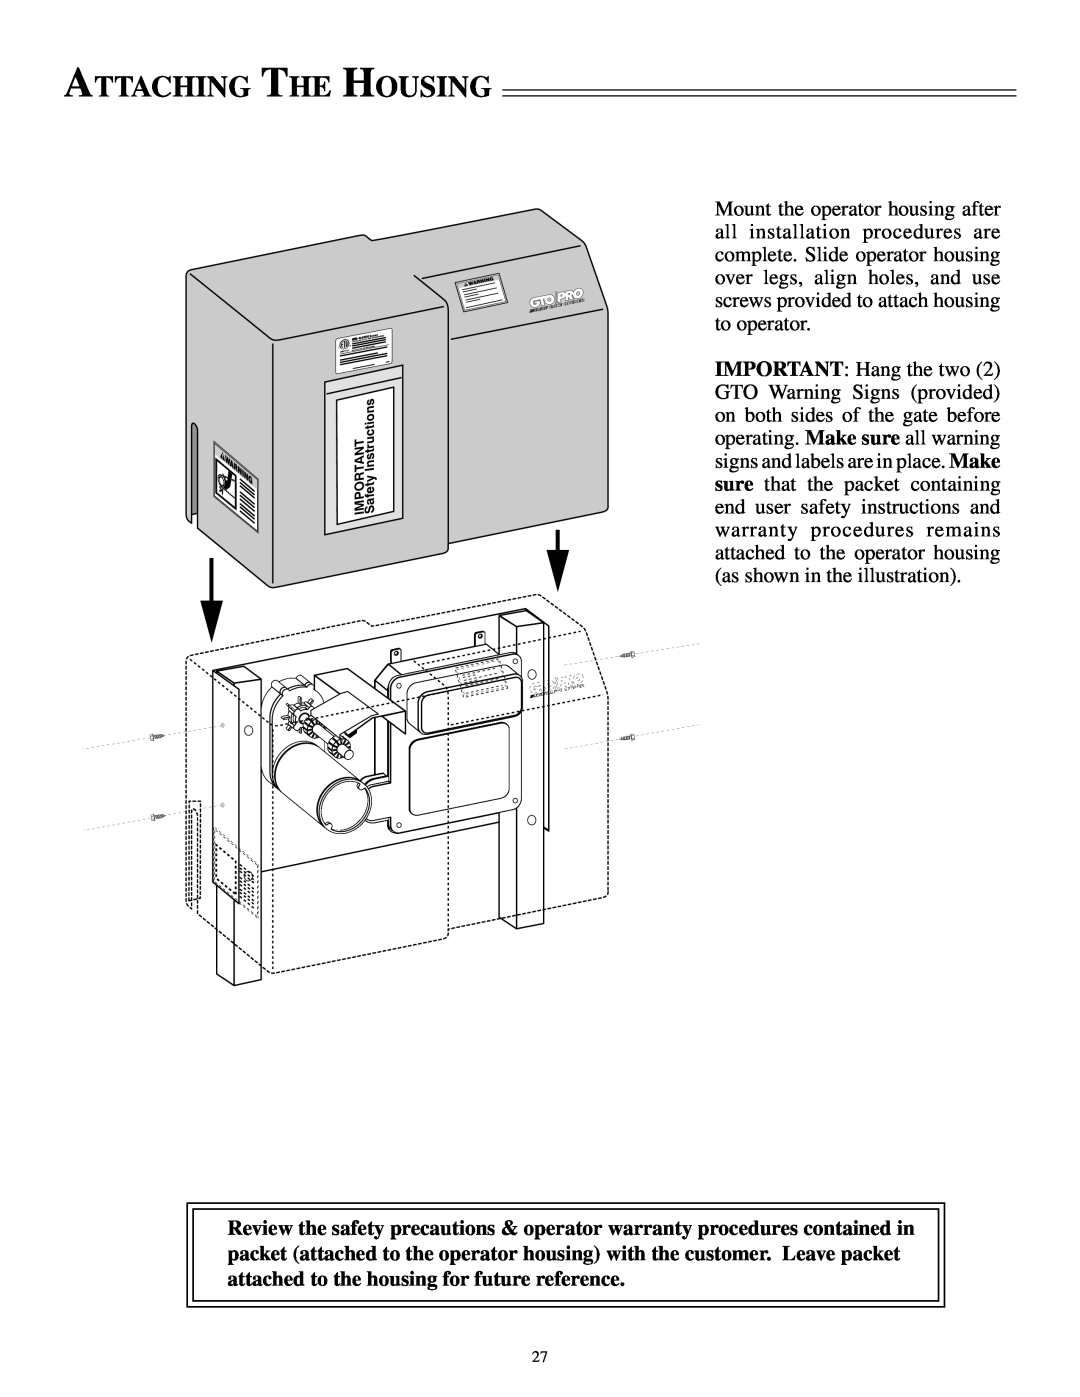 GTO SL-2000B, SL-1000B installation manual Attaching The Housing, IMPORTANT Safety Instructions 